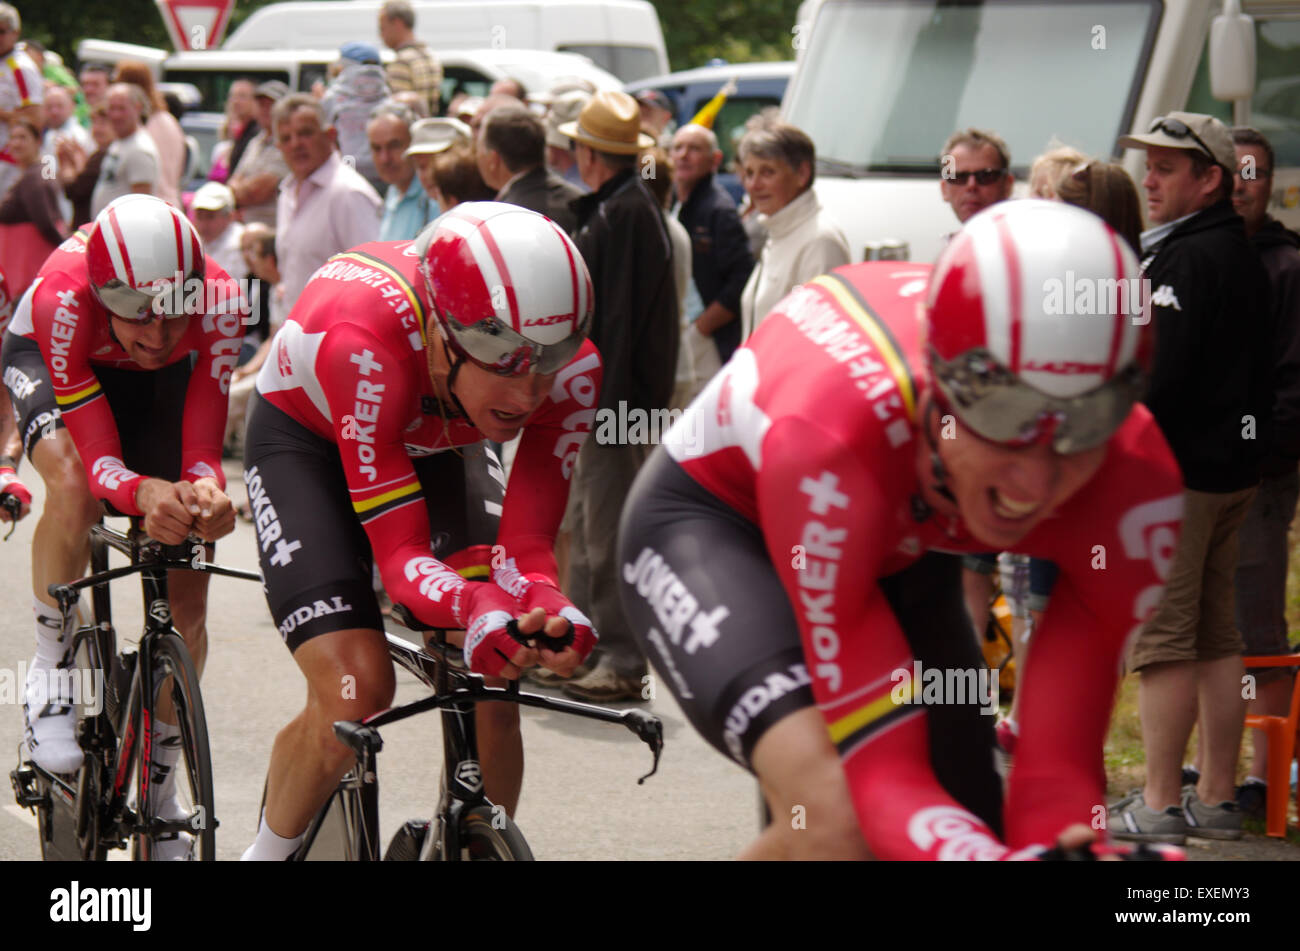 Le Bodan, Plumelec, Brittany, France. 12th July, 2015. Team Lotto-Soudal competing at the Tour de France 2015 Stage 9 Team Time Trial Credit:  Luke Peters/Alamy Live News Stock Photo